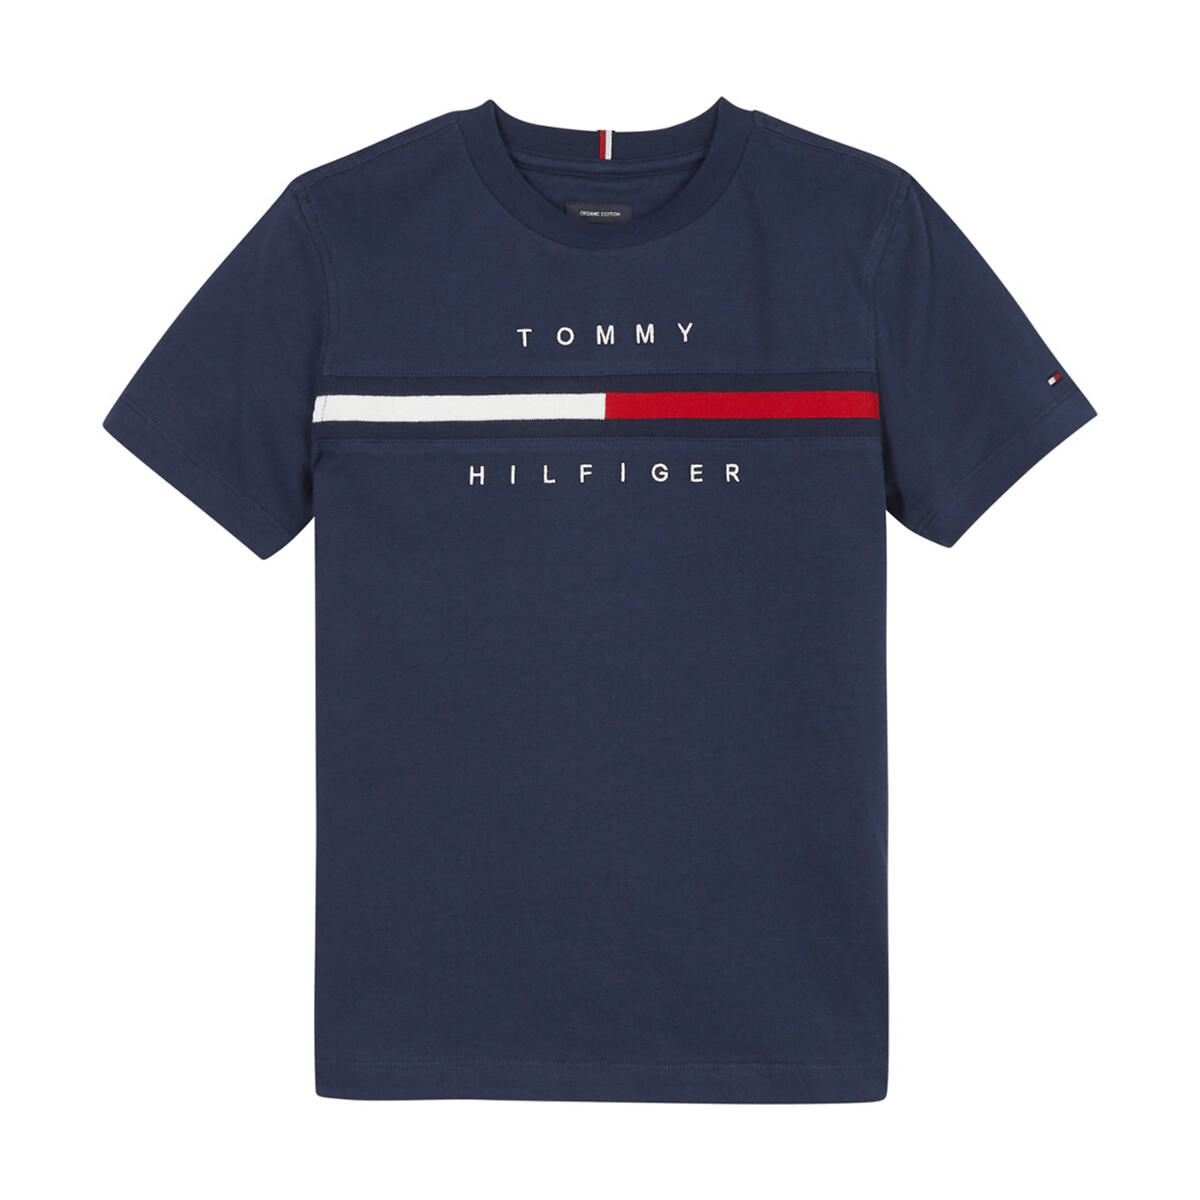 Children's Clothing | Kids, Baby & Teen TOMMY HILFIGER | La Redoute